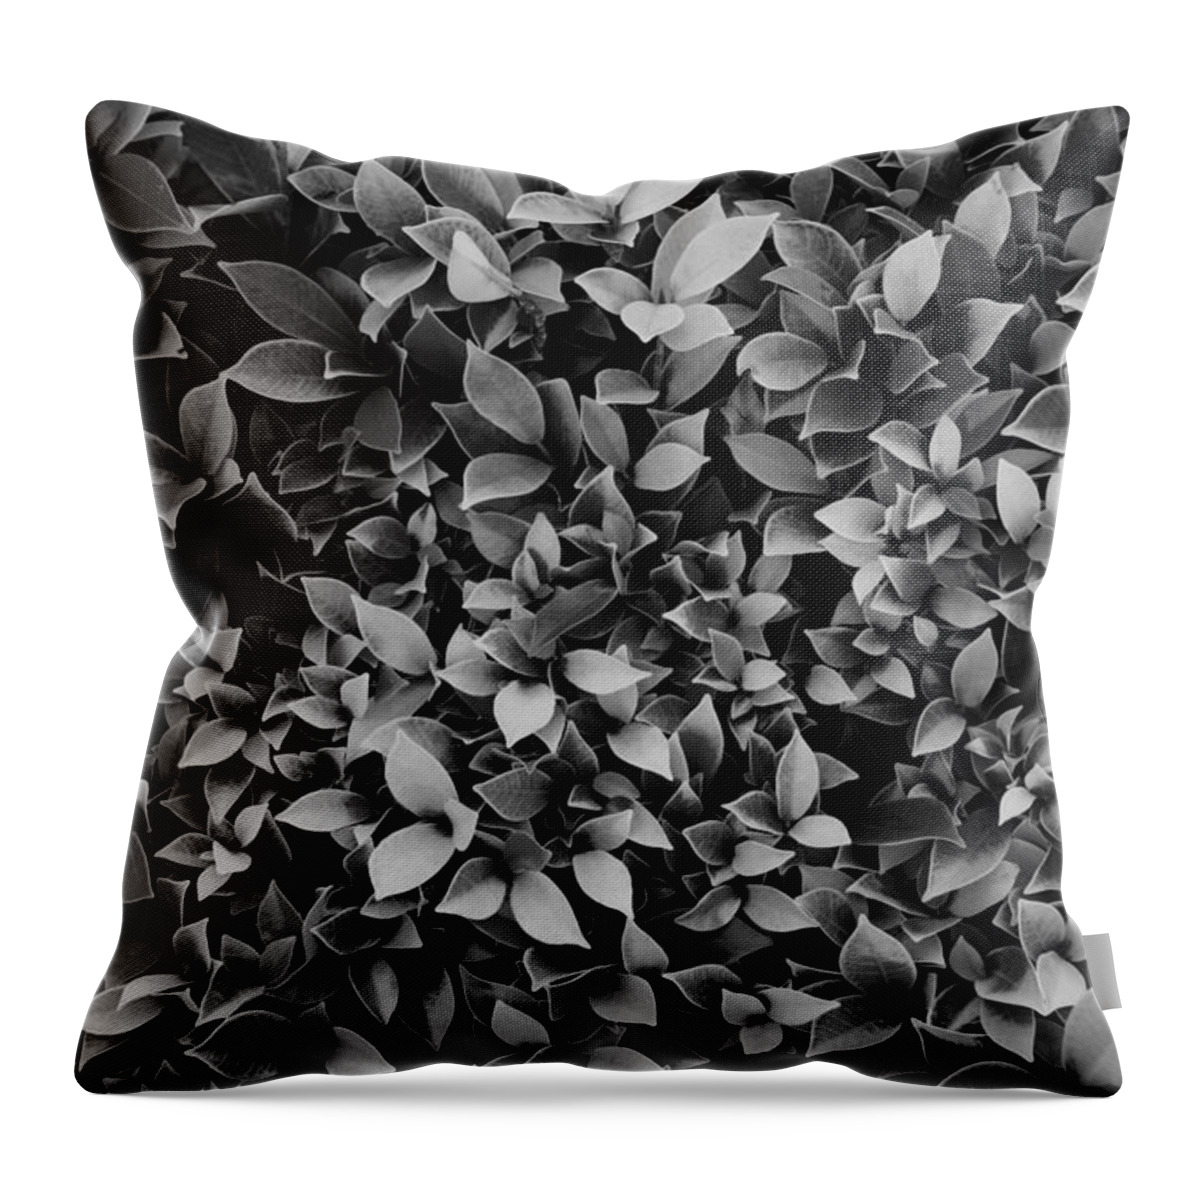 Abstract Throw Pillow featuring the photograph Leaf Close Up texture by Jarernjit Tanomchit